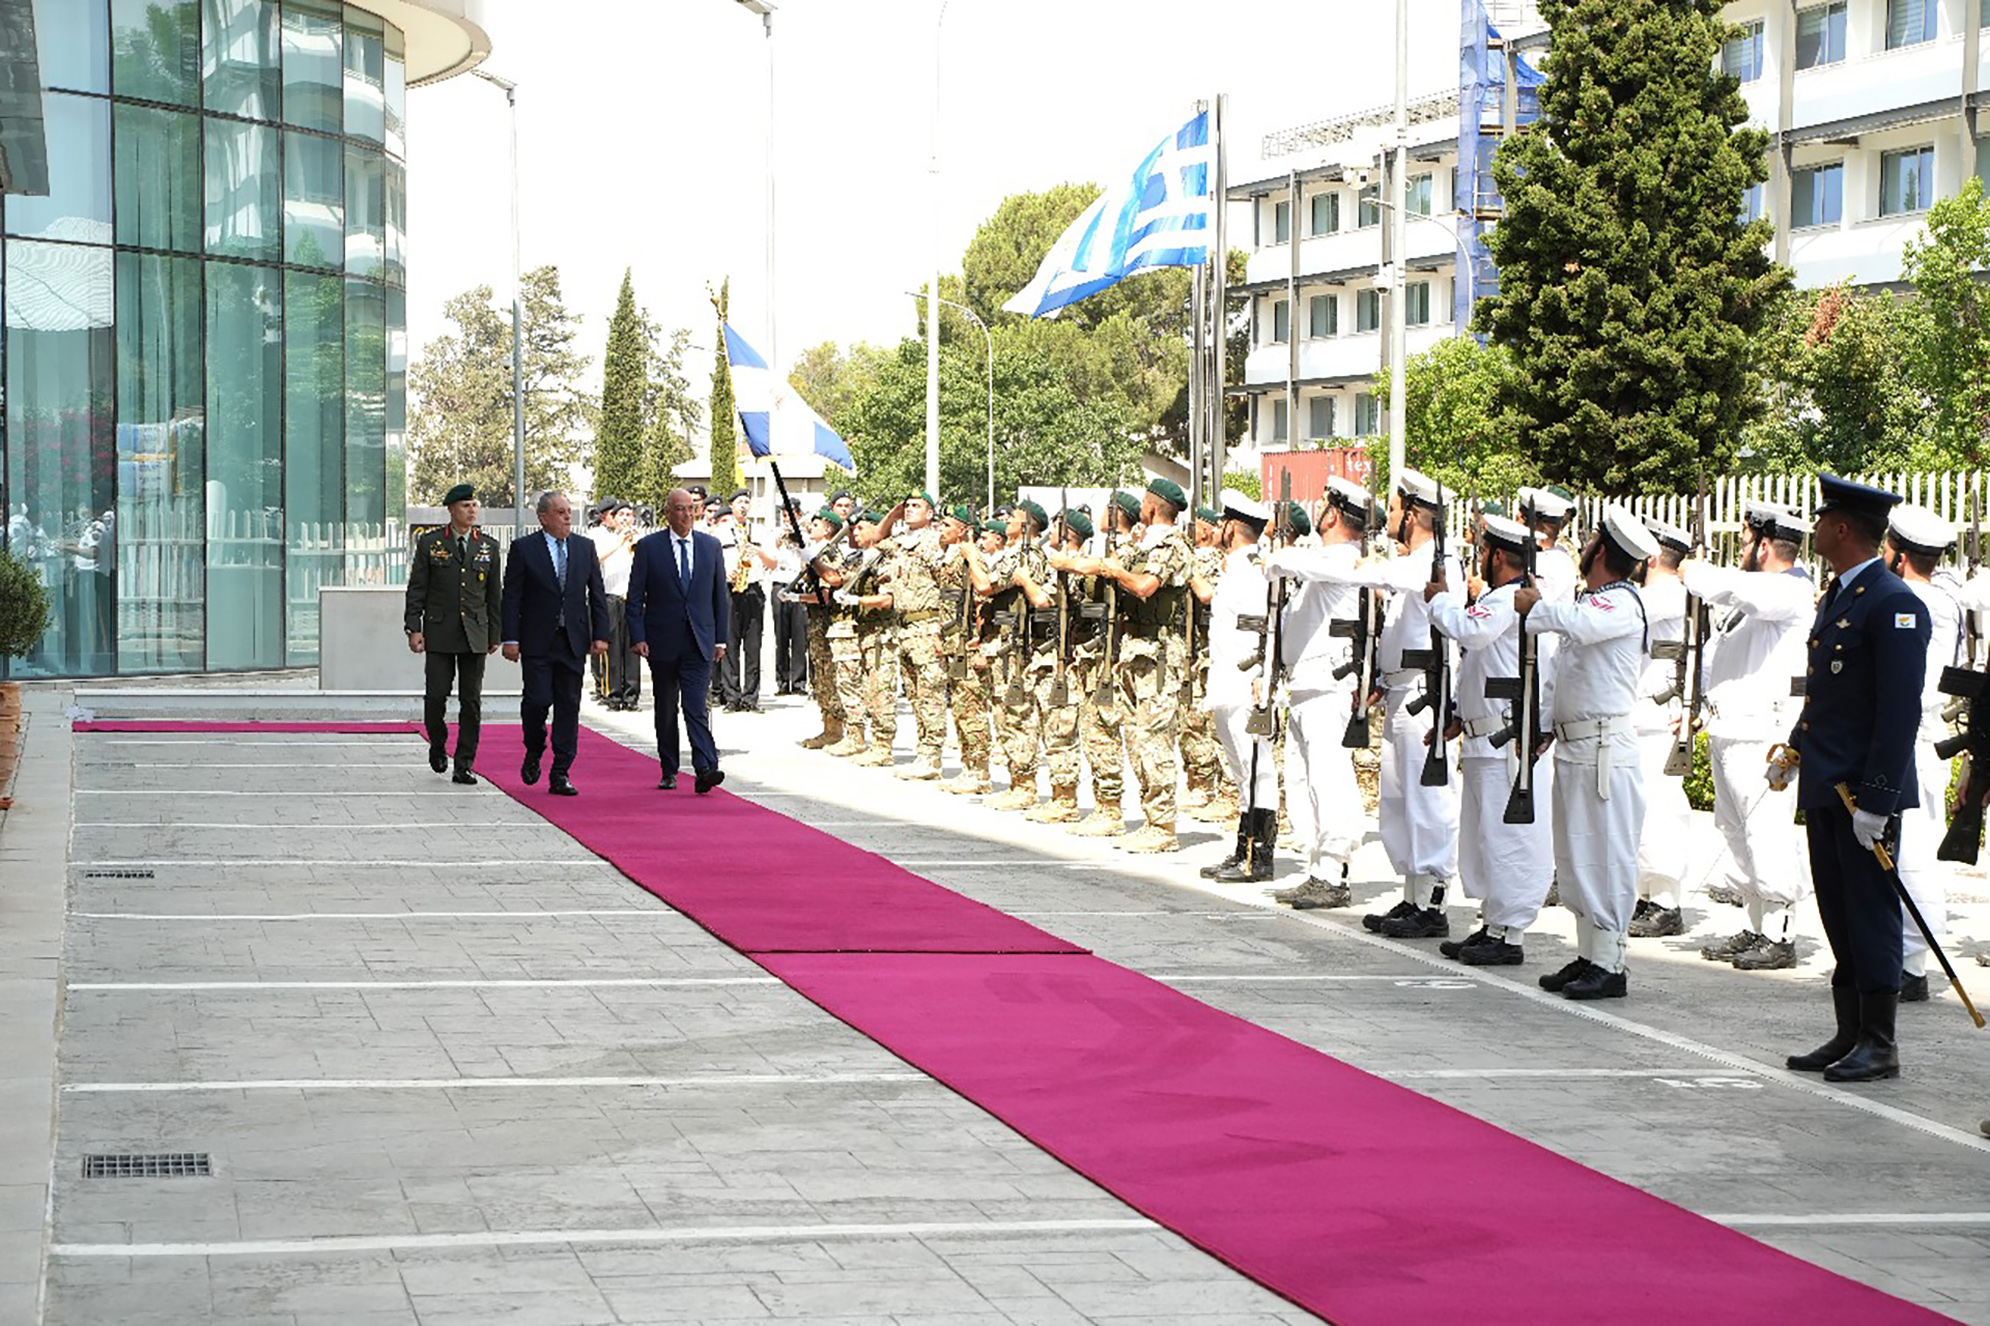 Dendias visit ‘shows Greece has separated itself’ from coupists